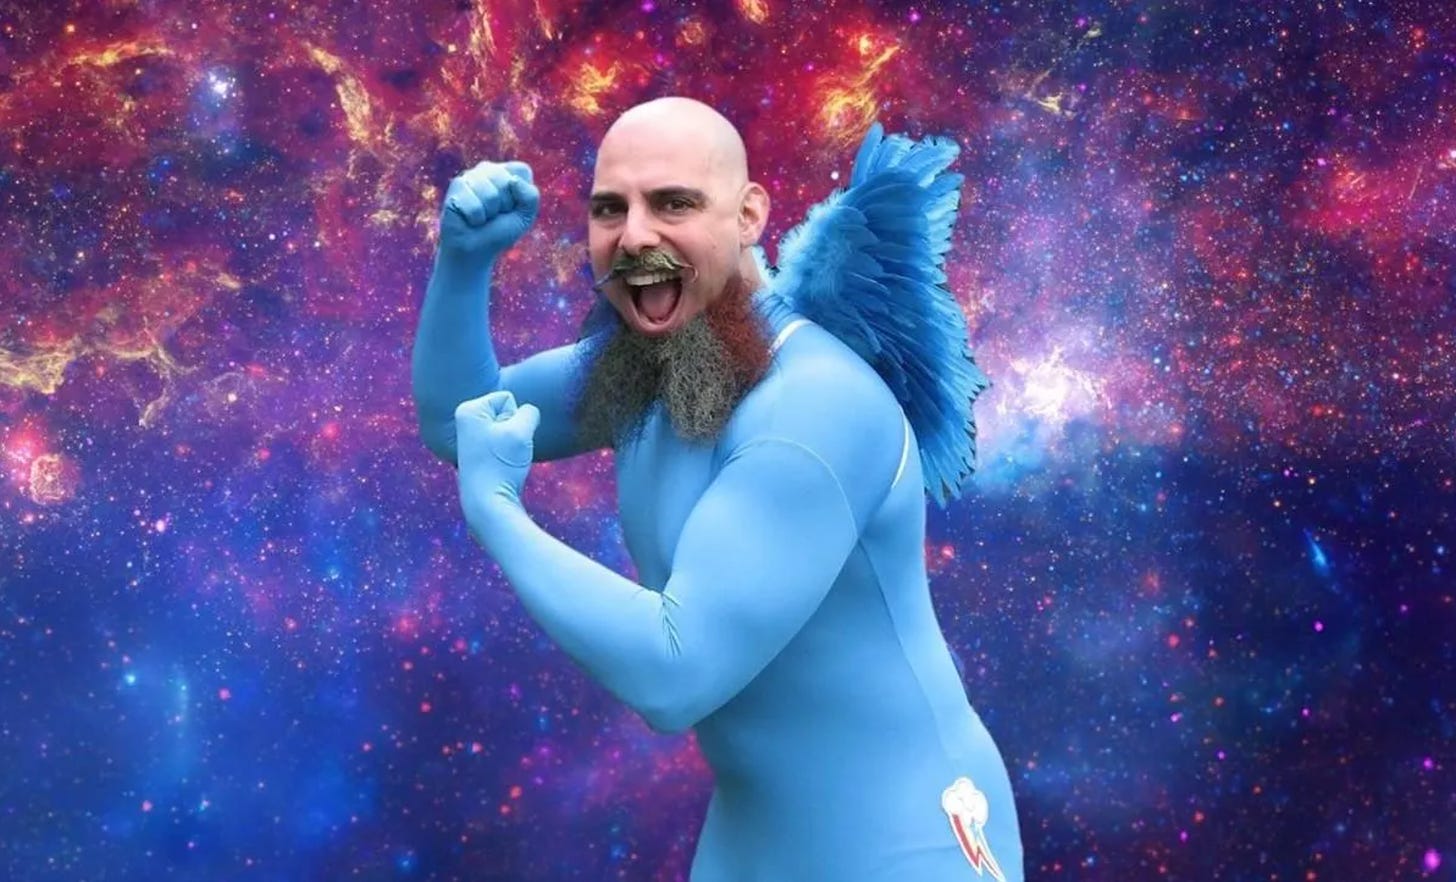 Ethan is wearing a blue lycra bodysuit with fluffy wings. he is making fists like a boxer. he has a shaved head and a long beard with a thick moustache. the background of the image is some sort of space nebula.